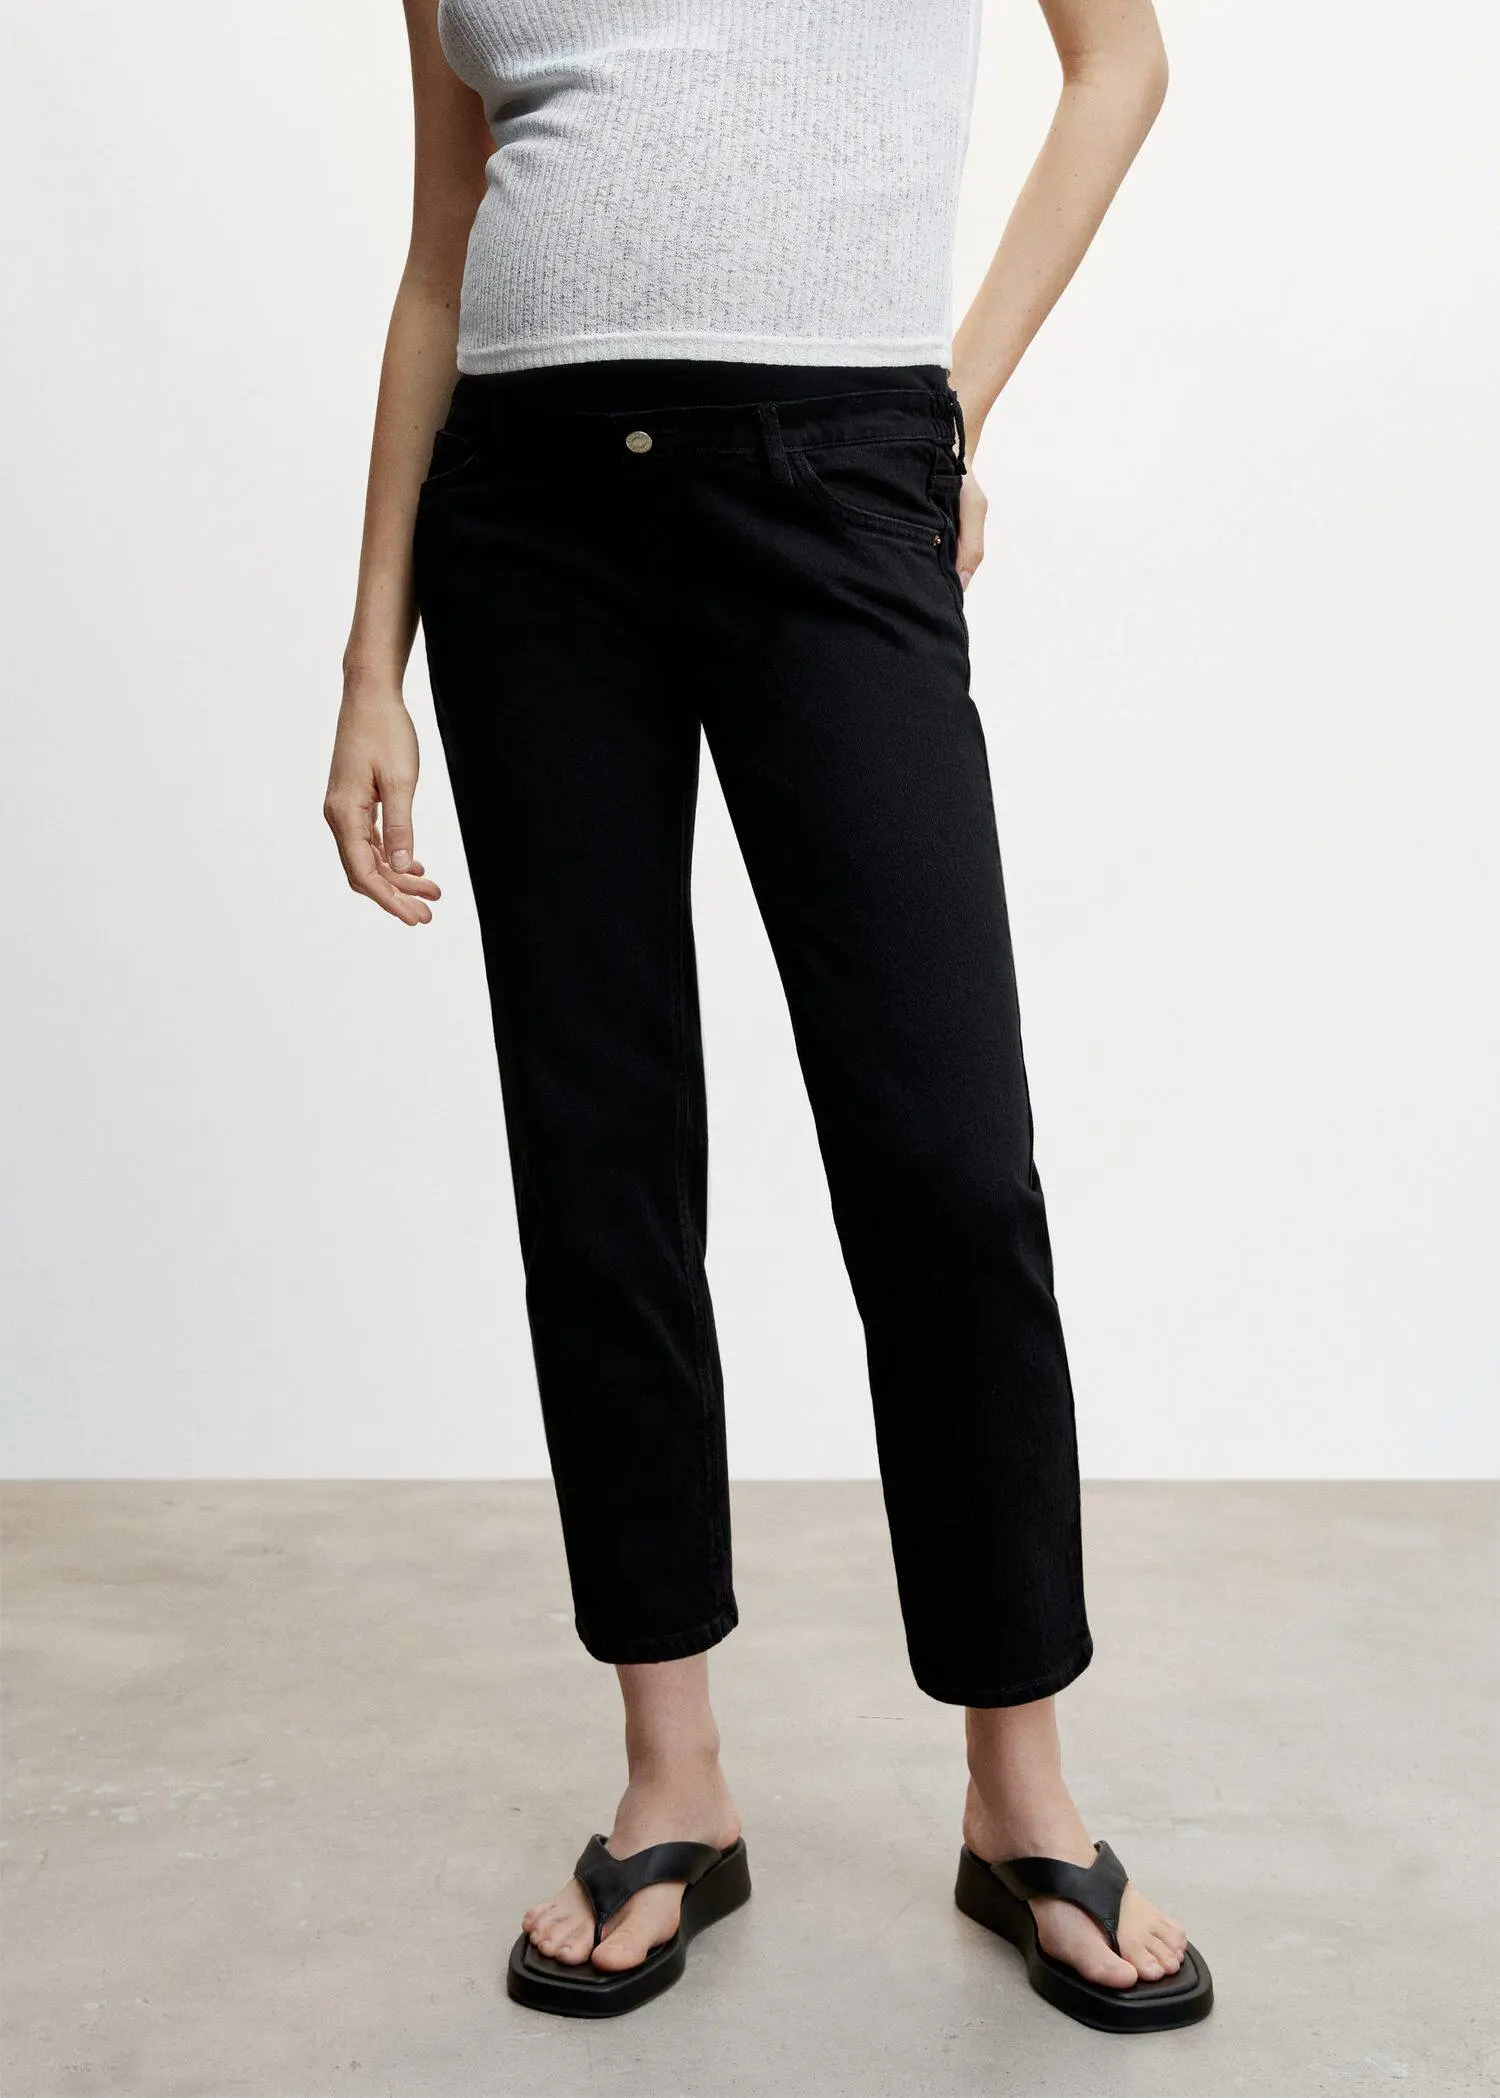 Mango Maternity Straight Jeans. a person standing in a room wearing black pants. 